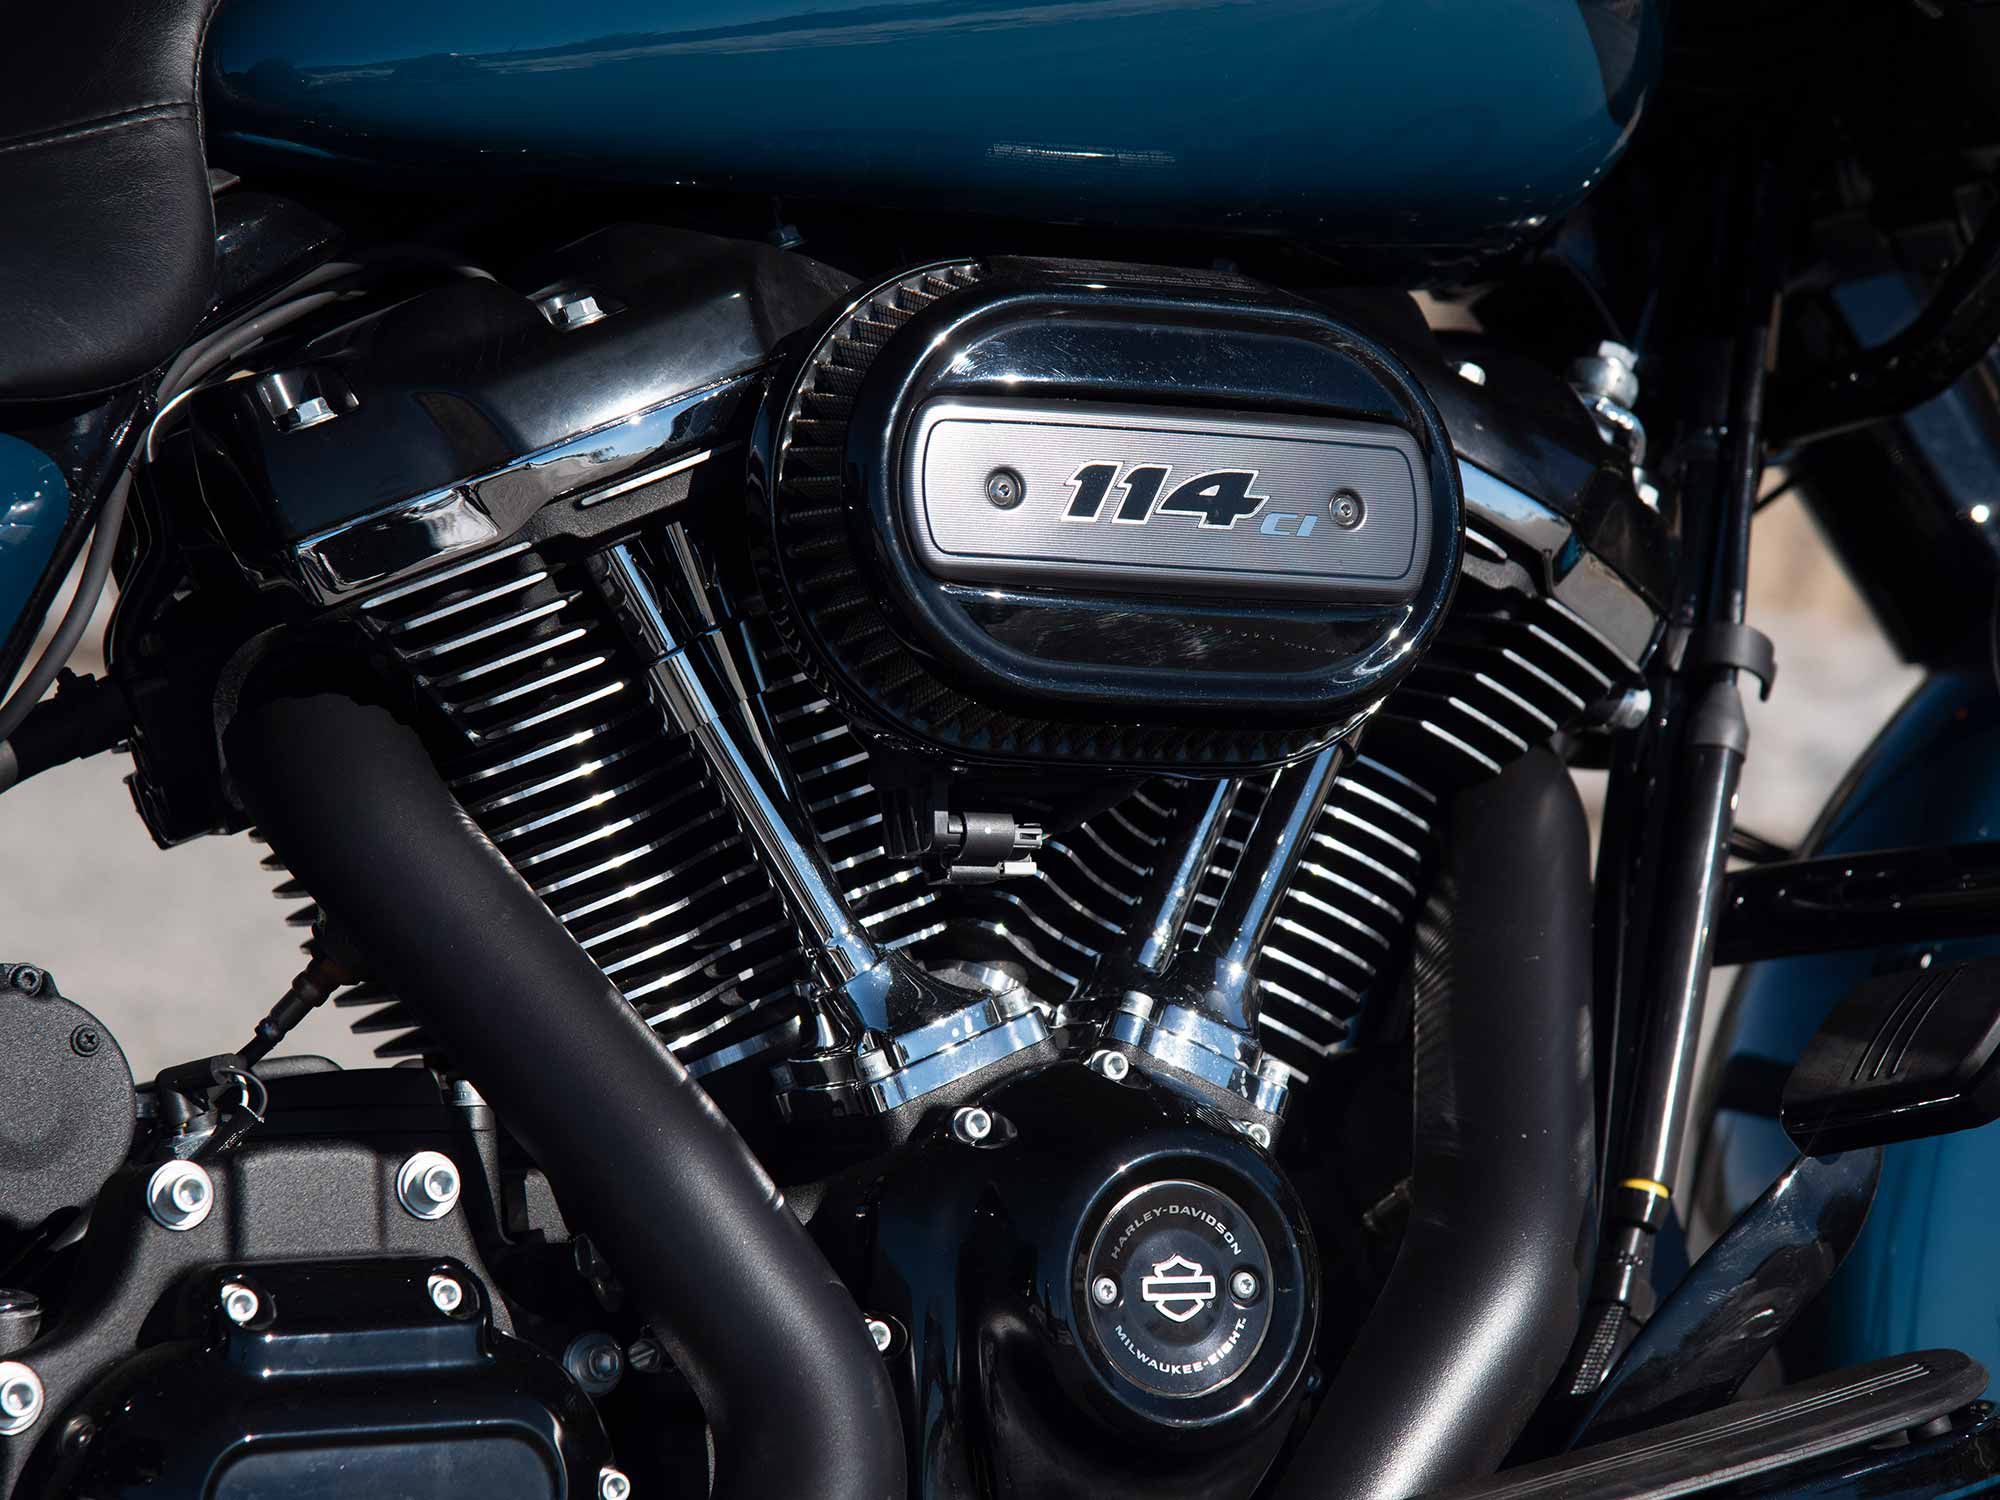 Harley’s 114ci Milwaukee-Eight isn’t the top dog powerplant, but it scoots along just fine with a robust 118 pound-feet of torque at 3,250 rpm.